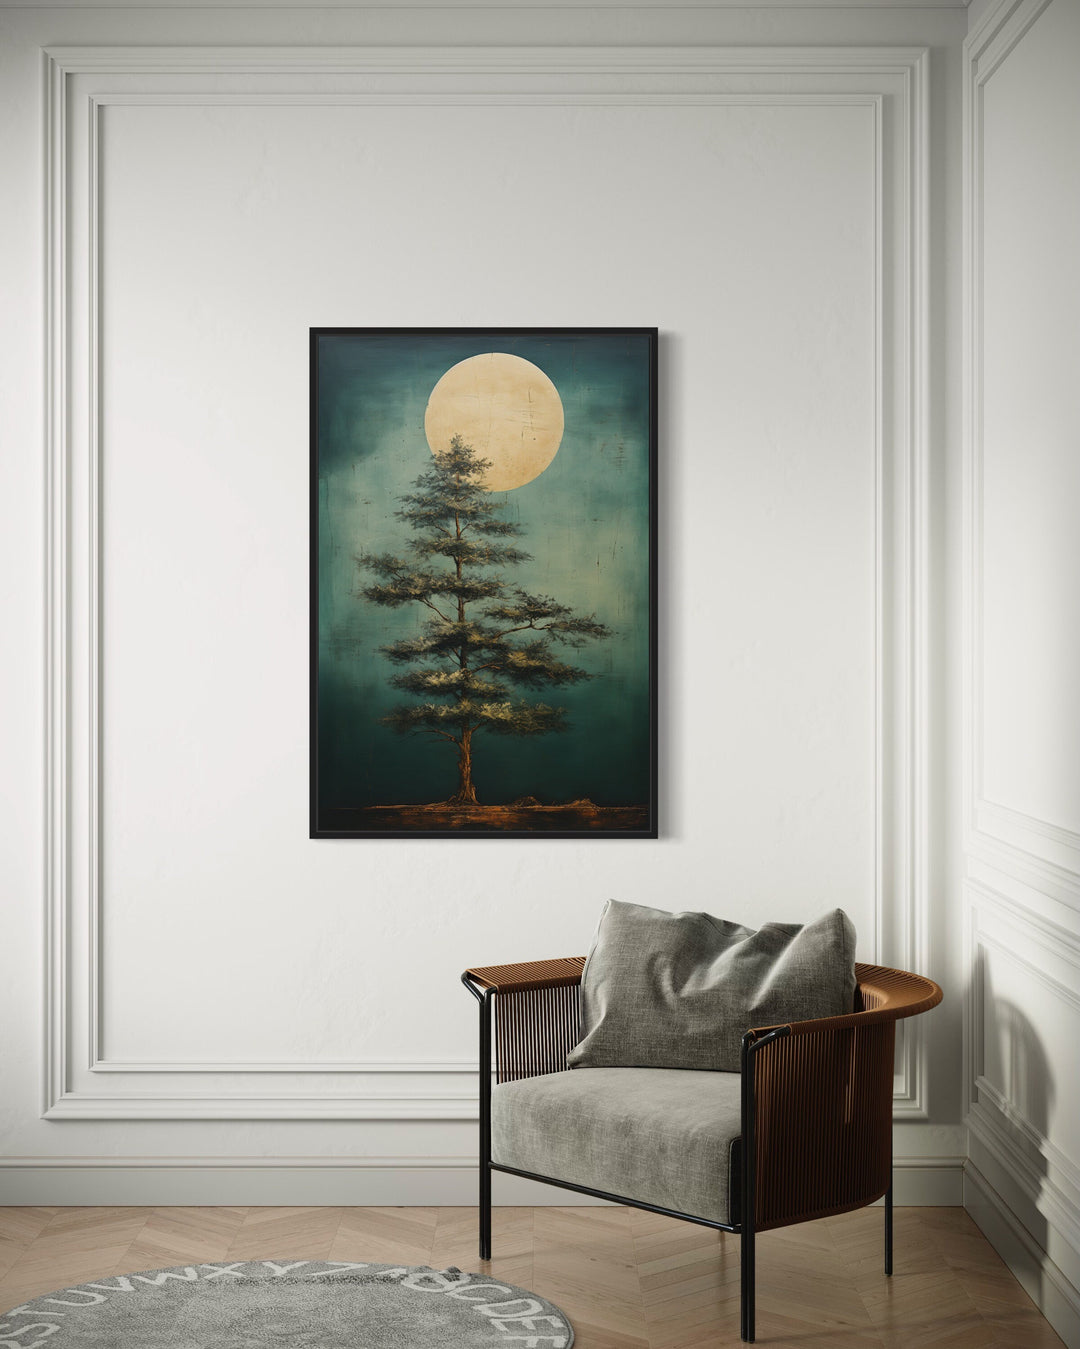 Vintage Tree And Moon Emerald Green Framed Canvas Wall Art in big room